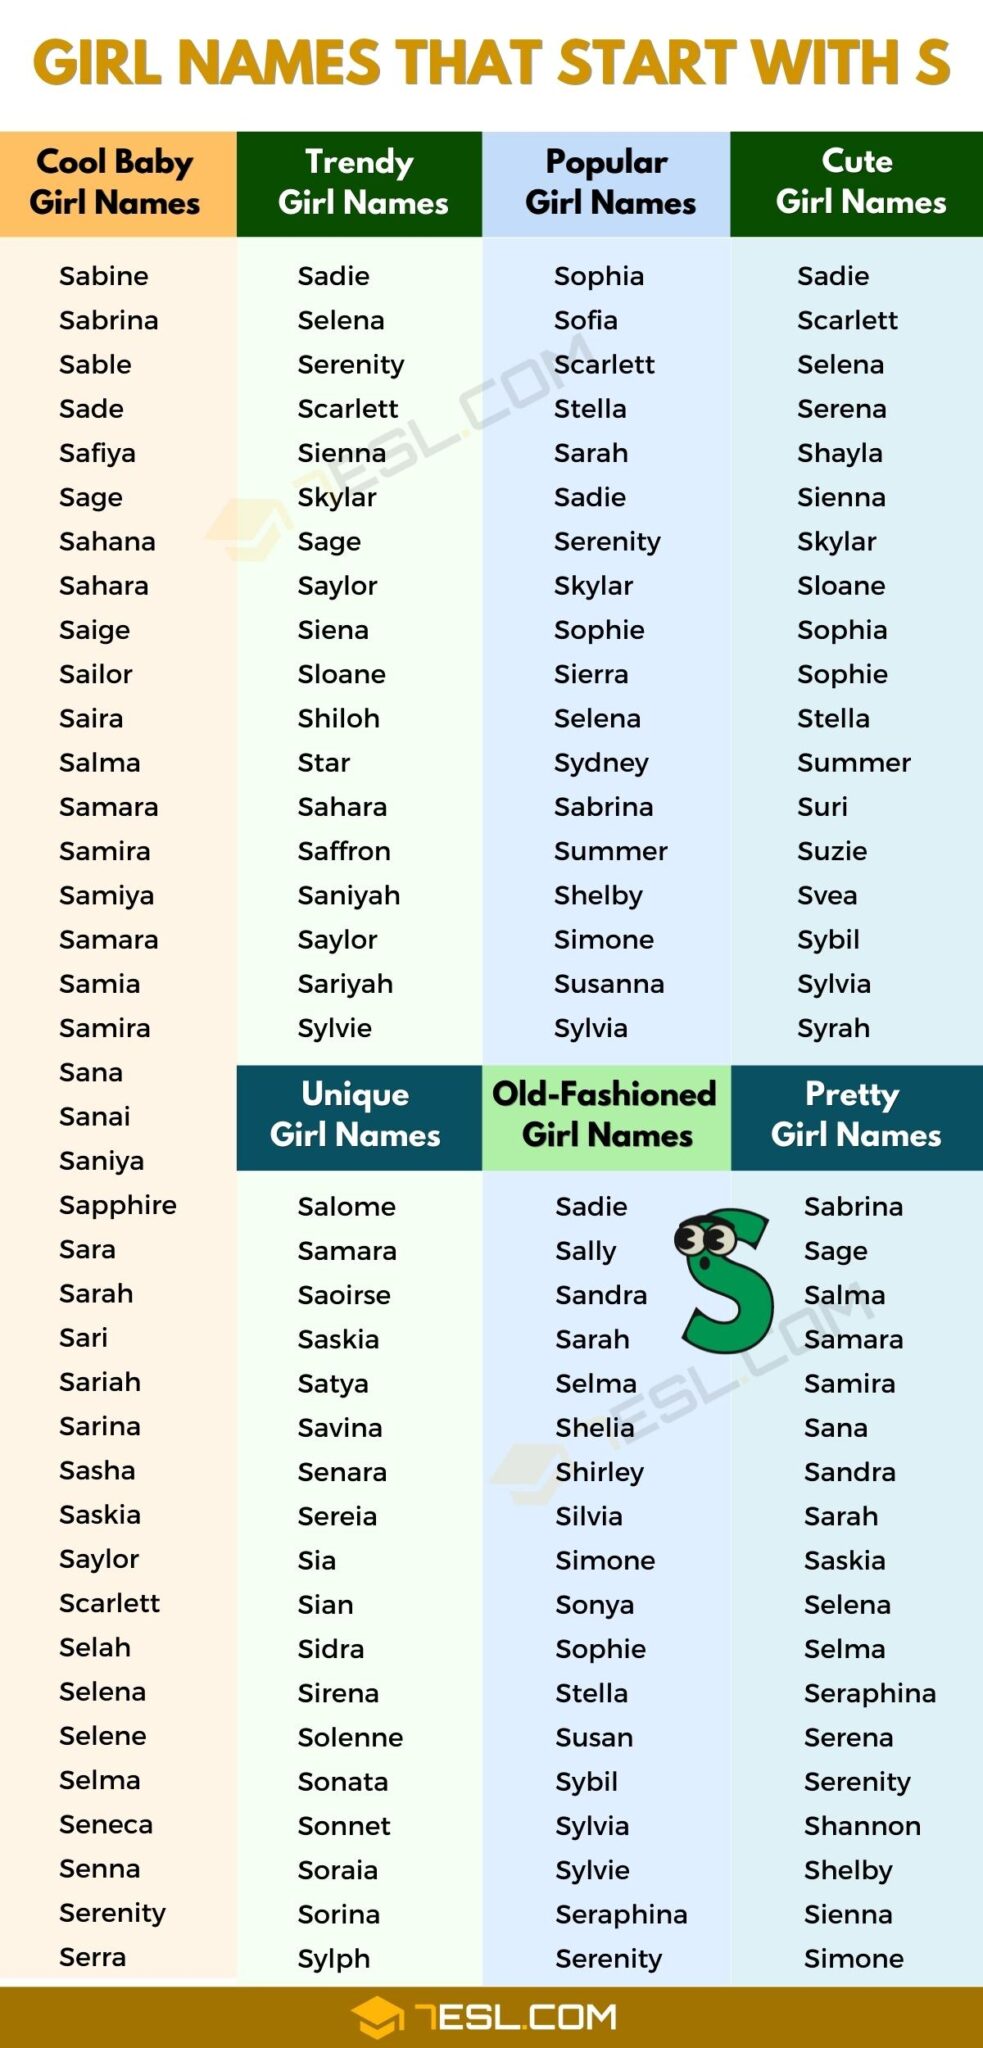 5 Letter Girl Names That Start With S